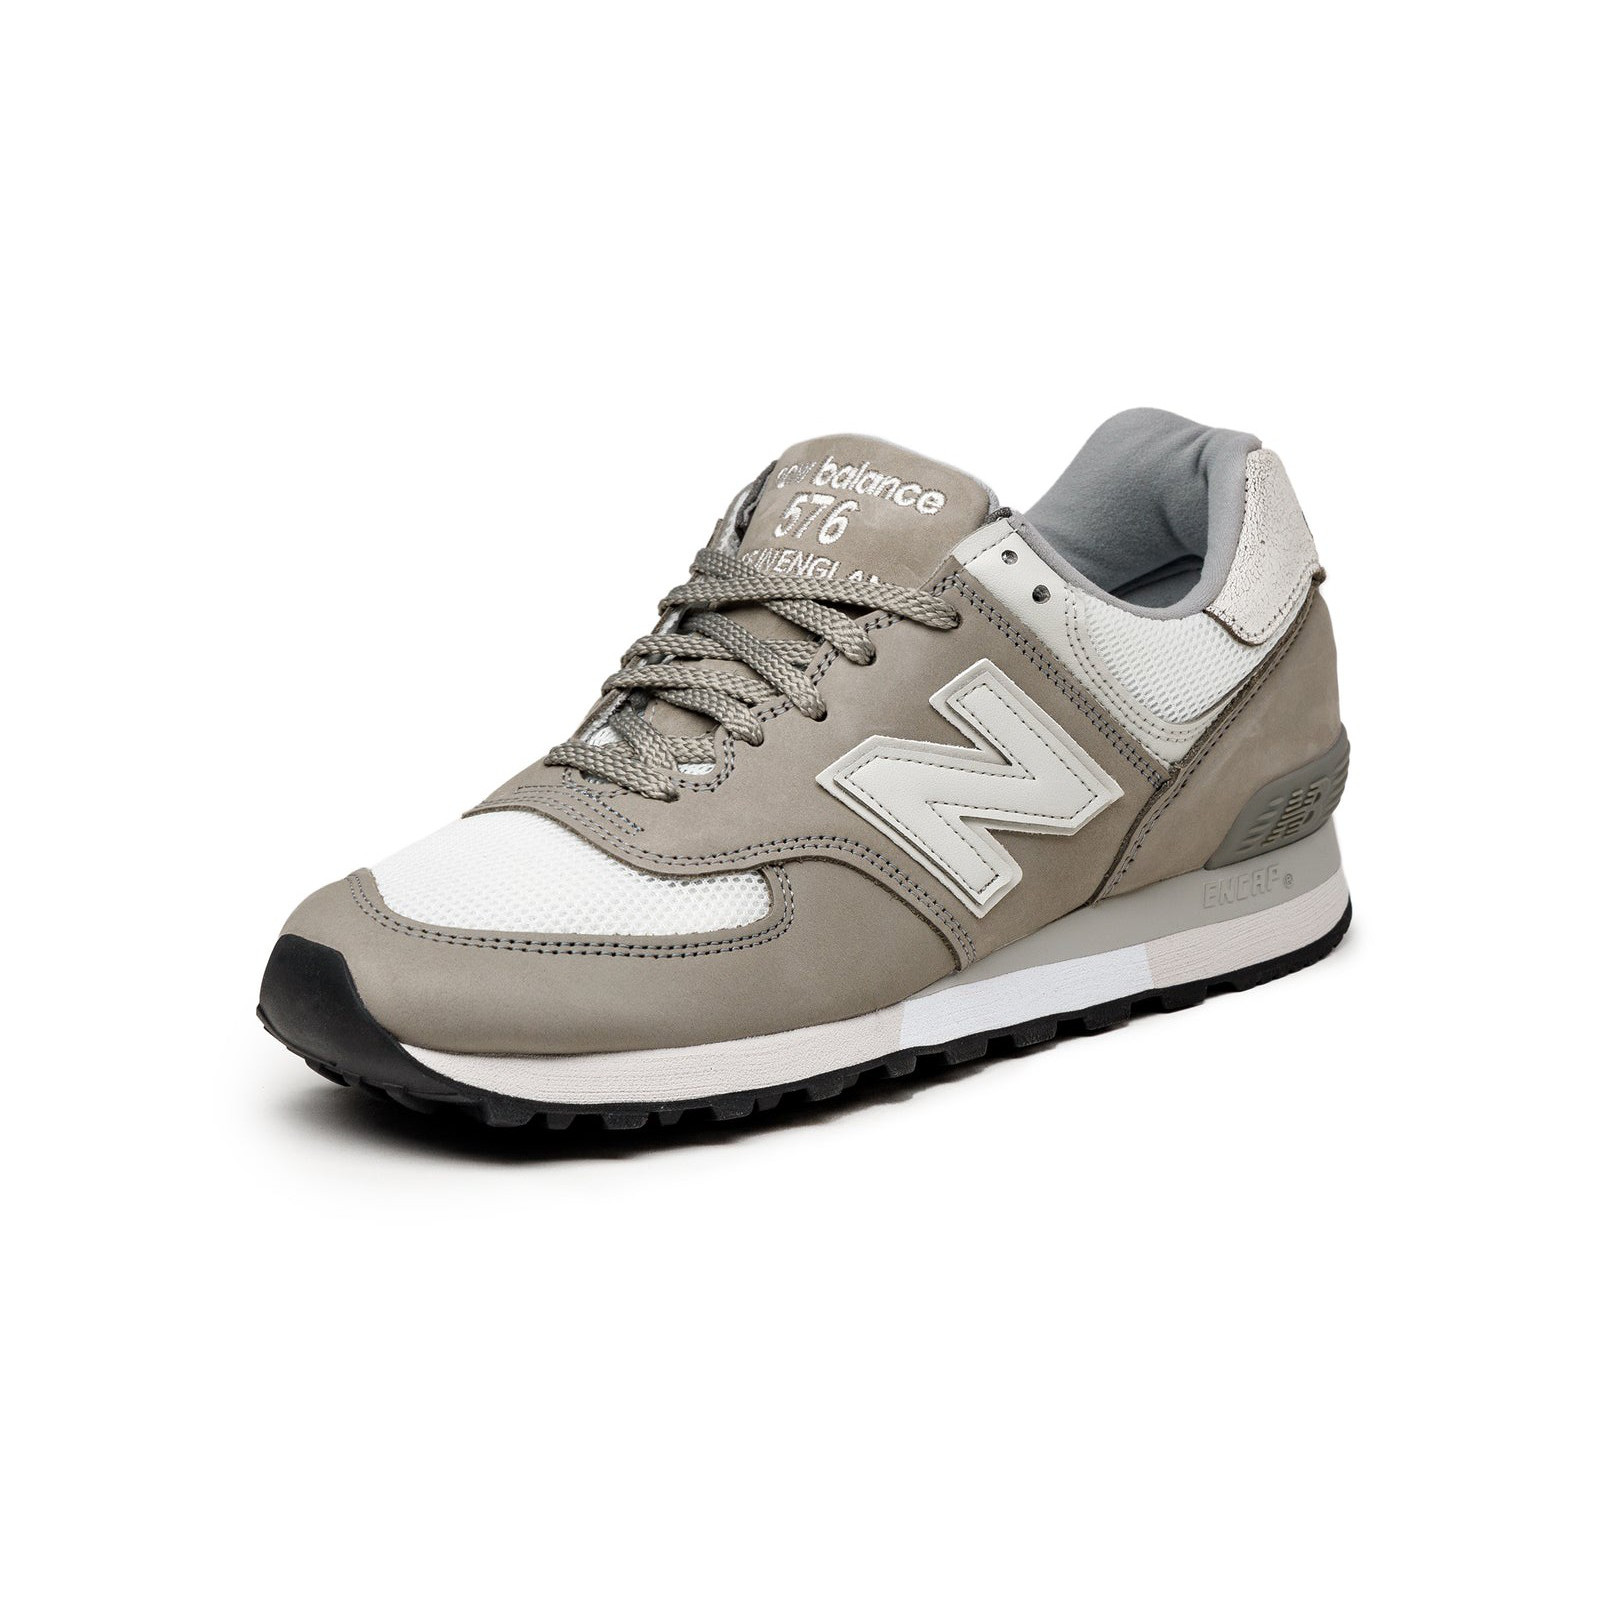 New Balance OU576FLB
Made in England
Flint Gray / Star White